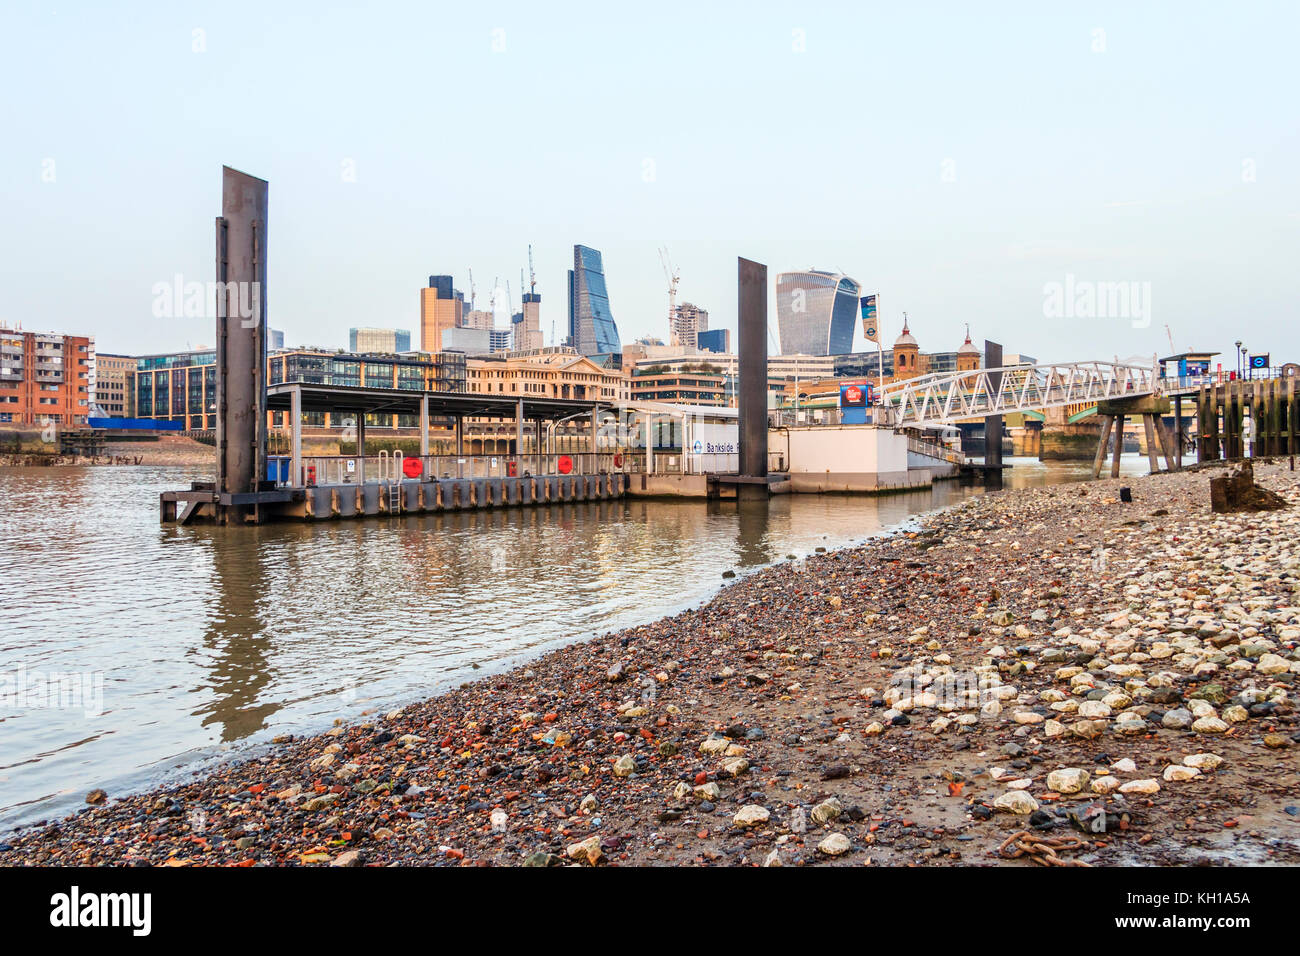 Bankside Pier, London, UK, seen from the Thames foreshore at low tide on an autumn evening Stock Photo